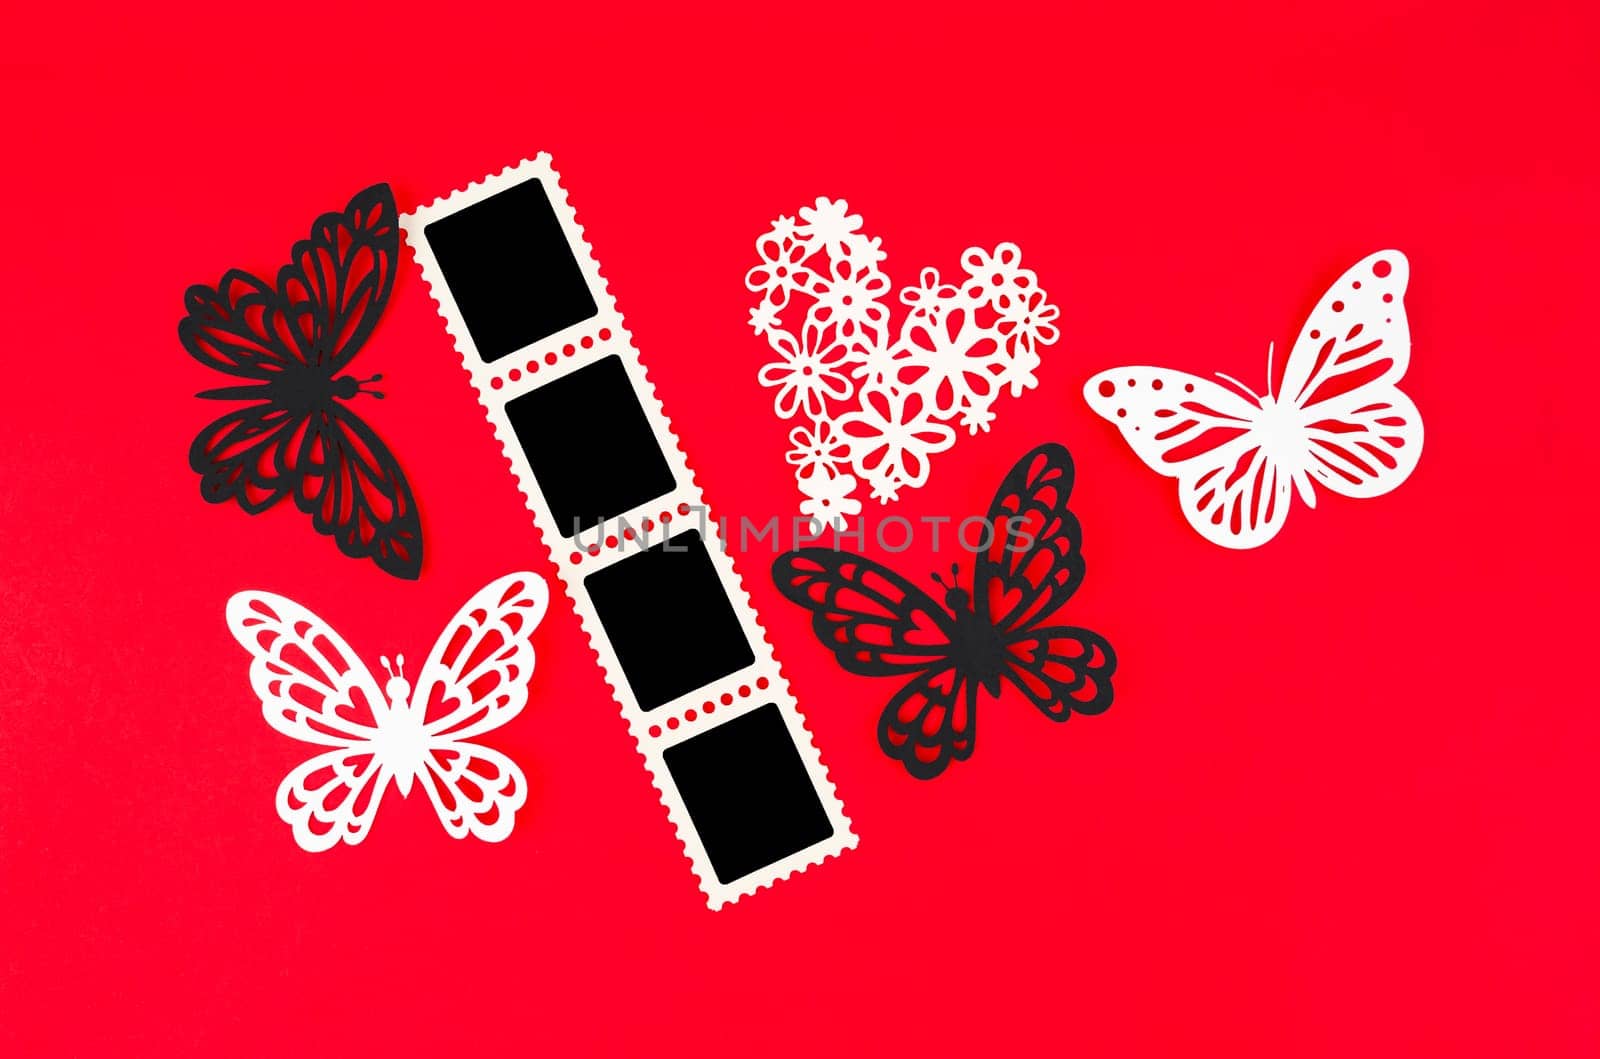 Cinema strip photo paper frames with butterfly paper on red background. Save clipping path.